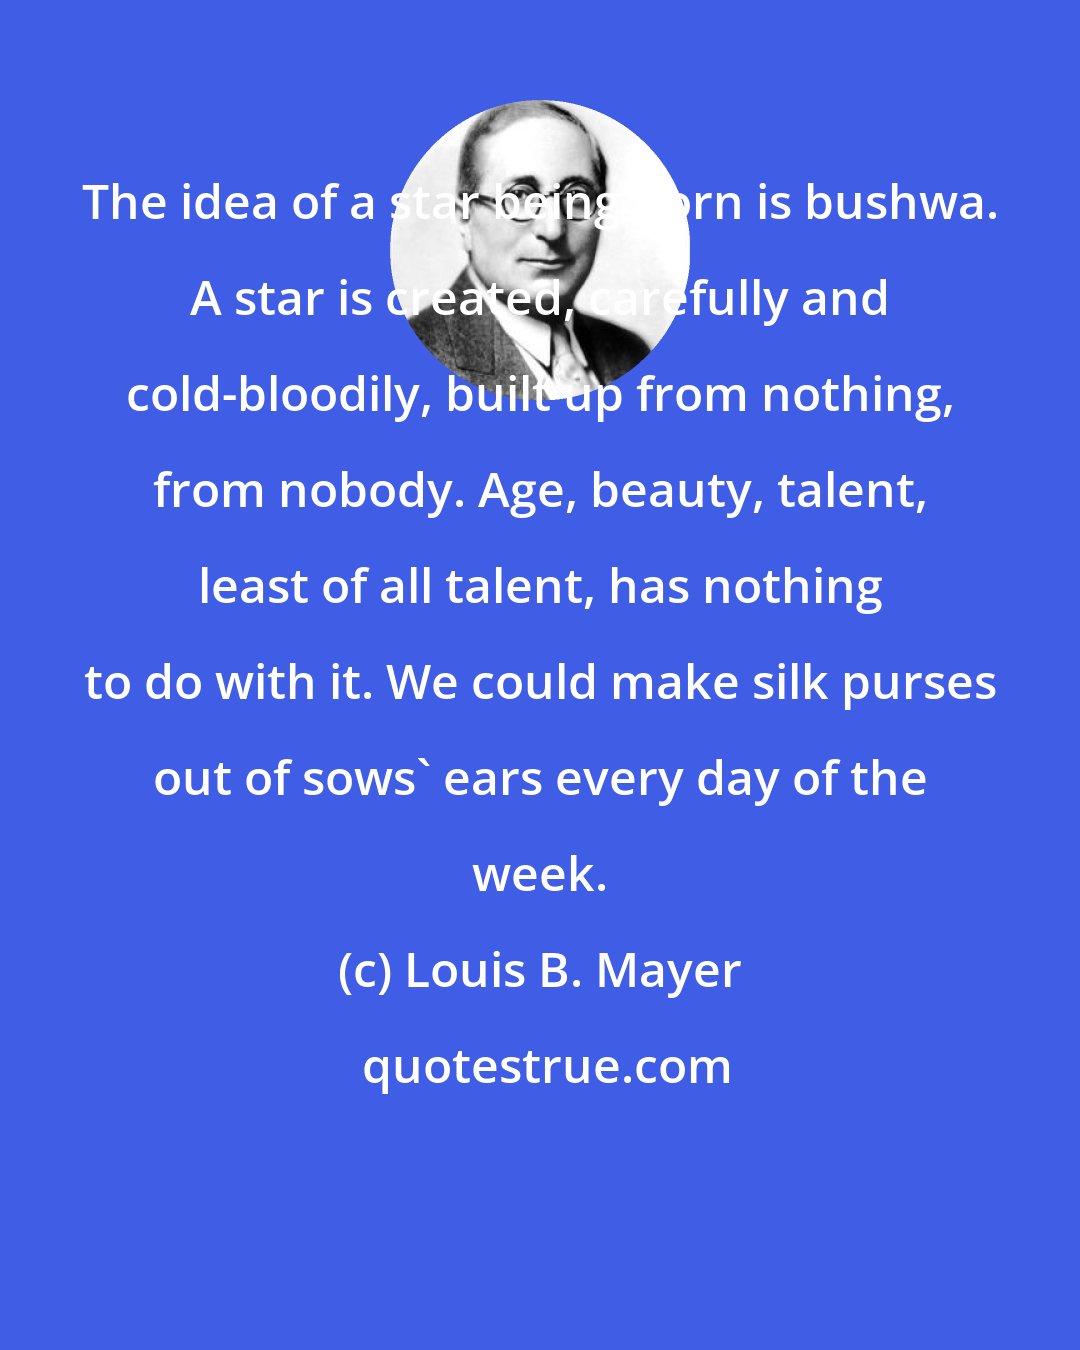 Louis B. Mayer: The idea of a star being born is bushwa. A star is created, carefully and cold-bloodily, built up from nothing, from nobody. Age, beauty, talent, least of all talent, has nothing to do with it. We could make silk purses out of sows' ears every day of the week.